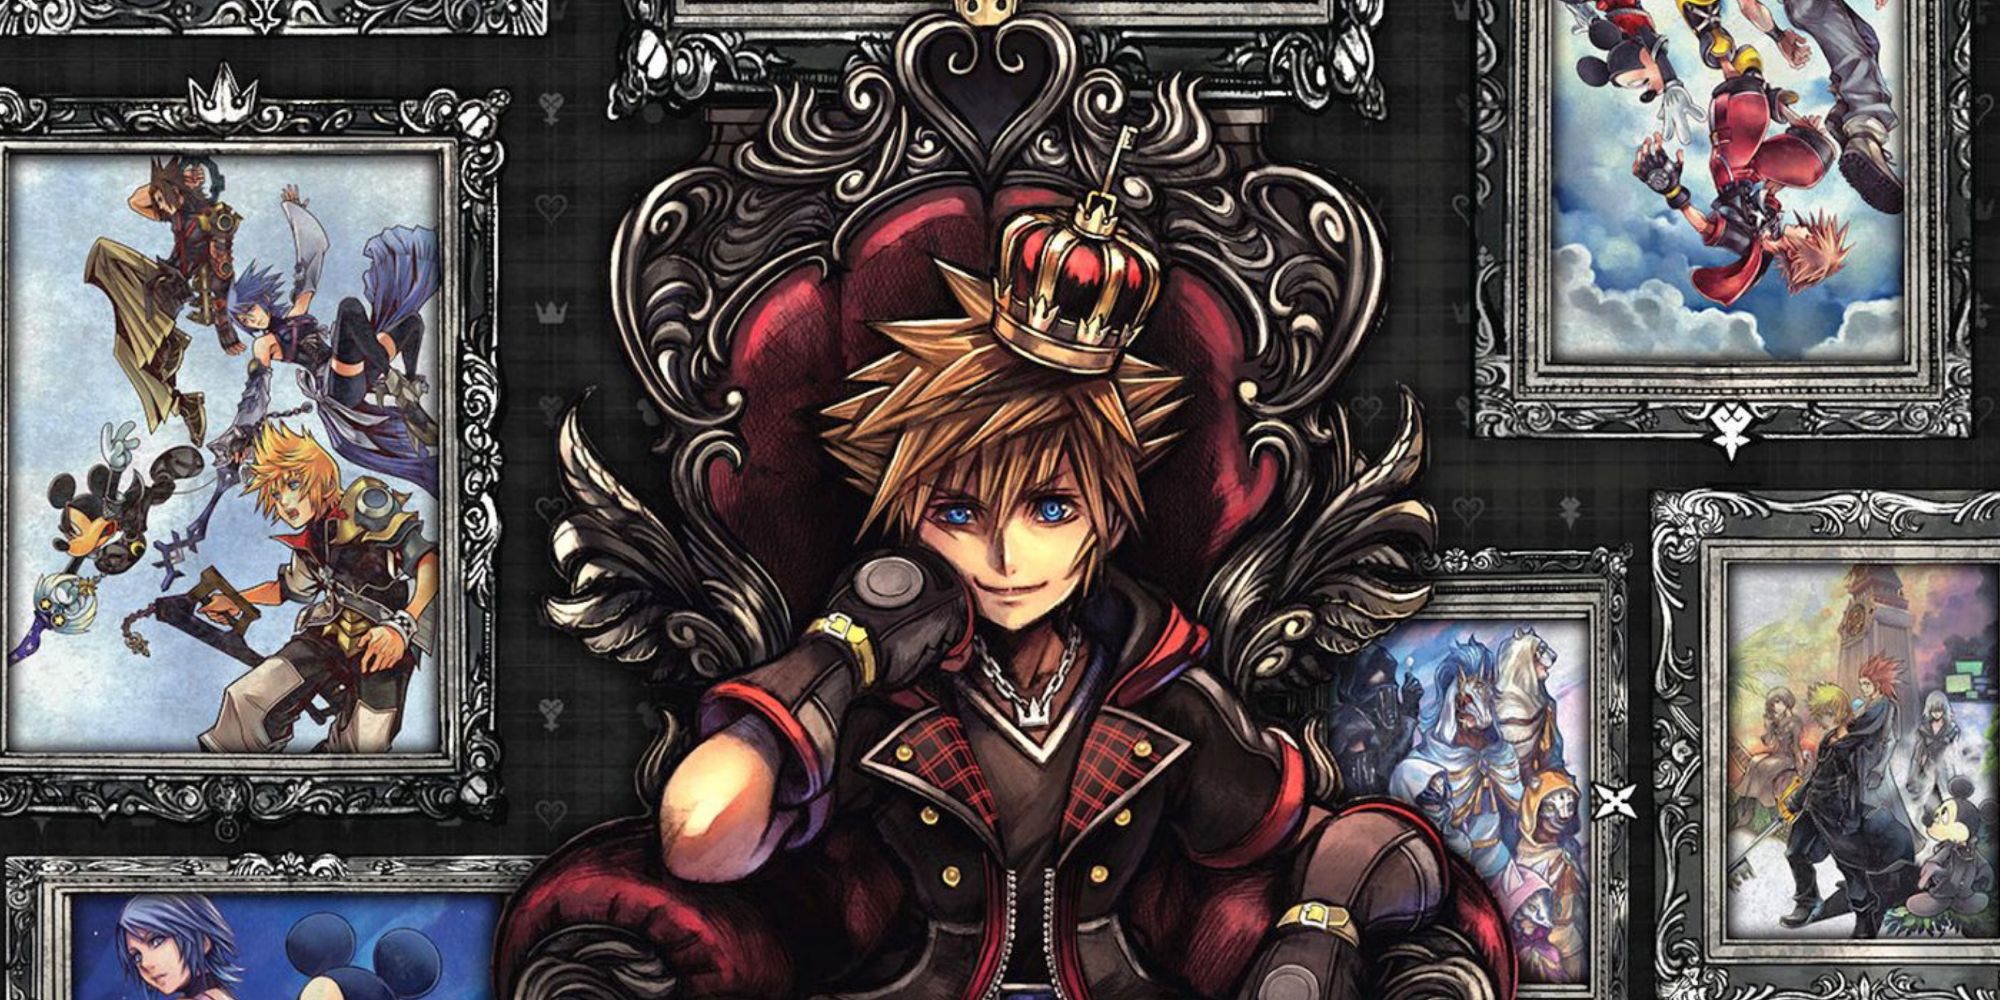 Kingdom Hearts All In One Package cover showing Sora wearing a crown and sitting on a throne.